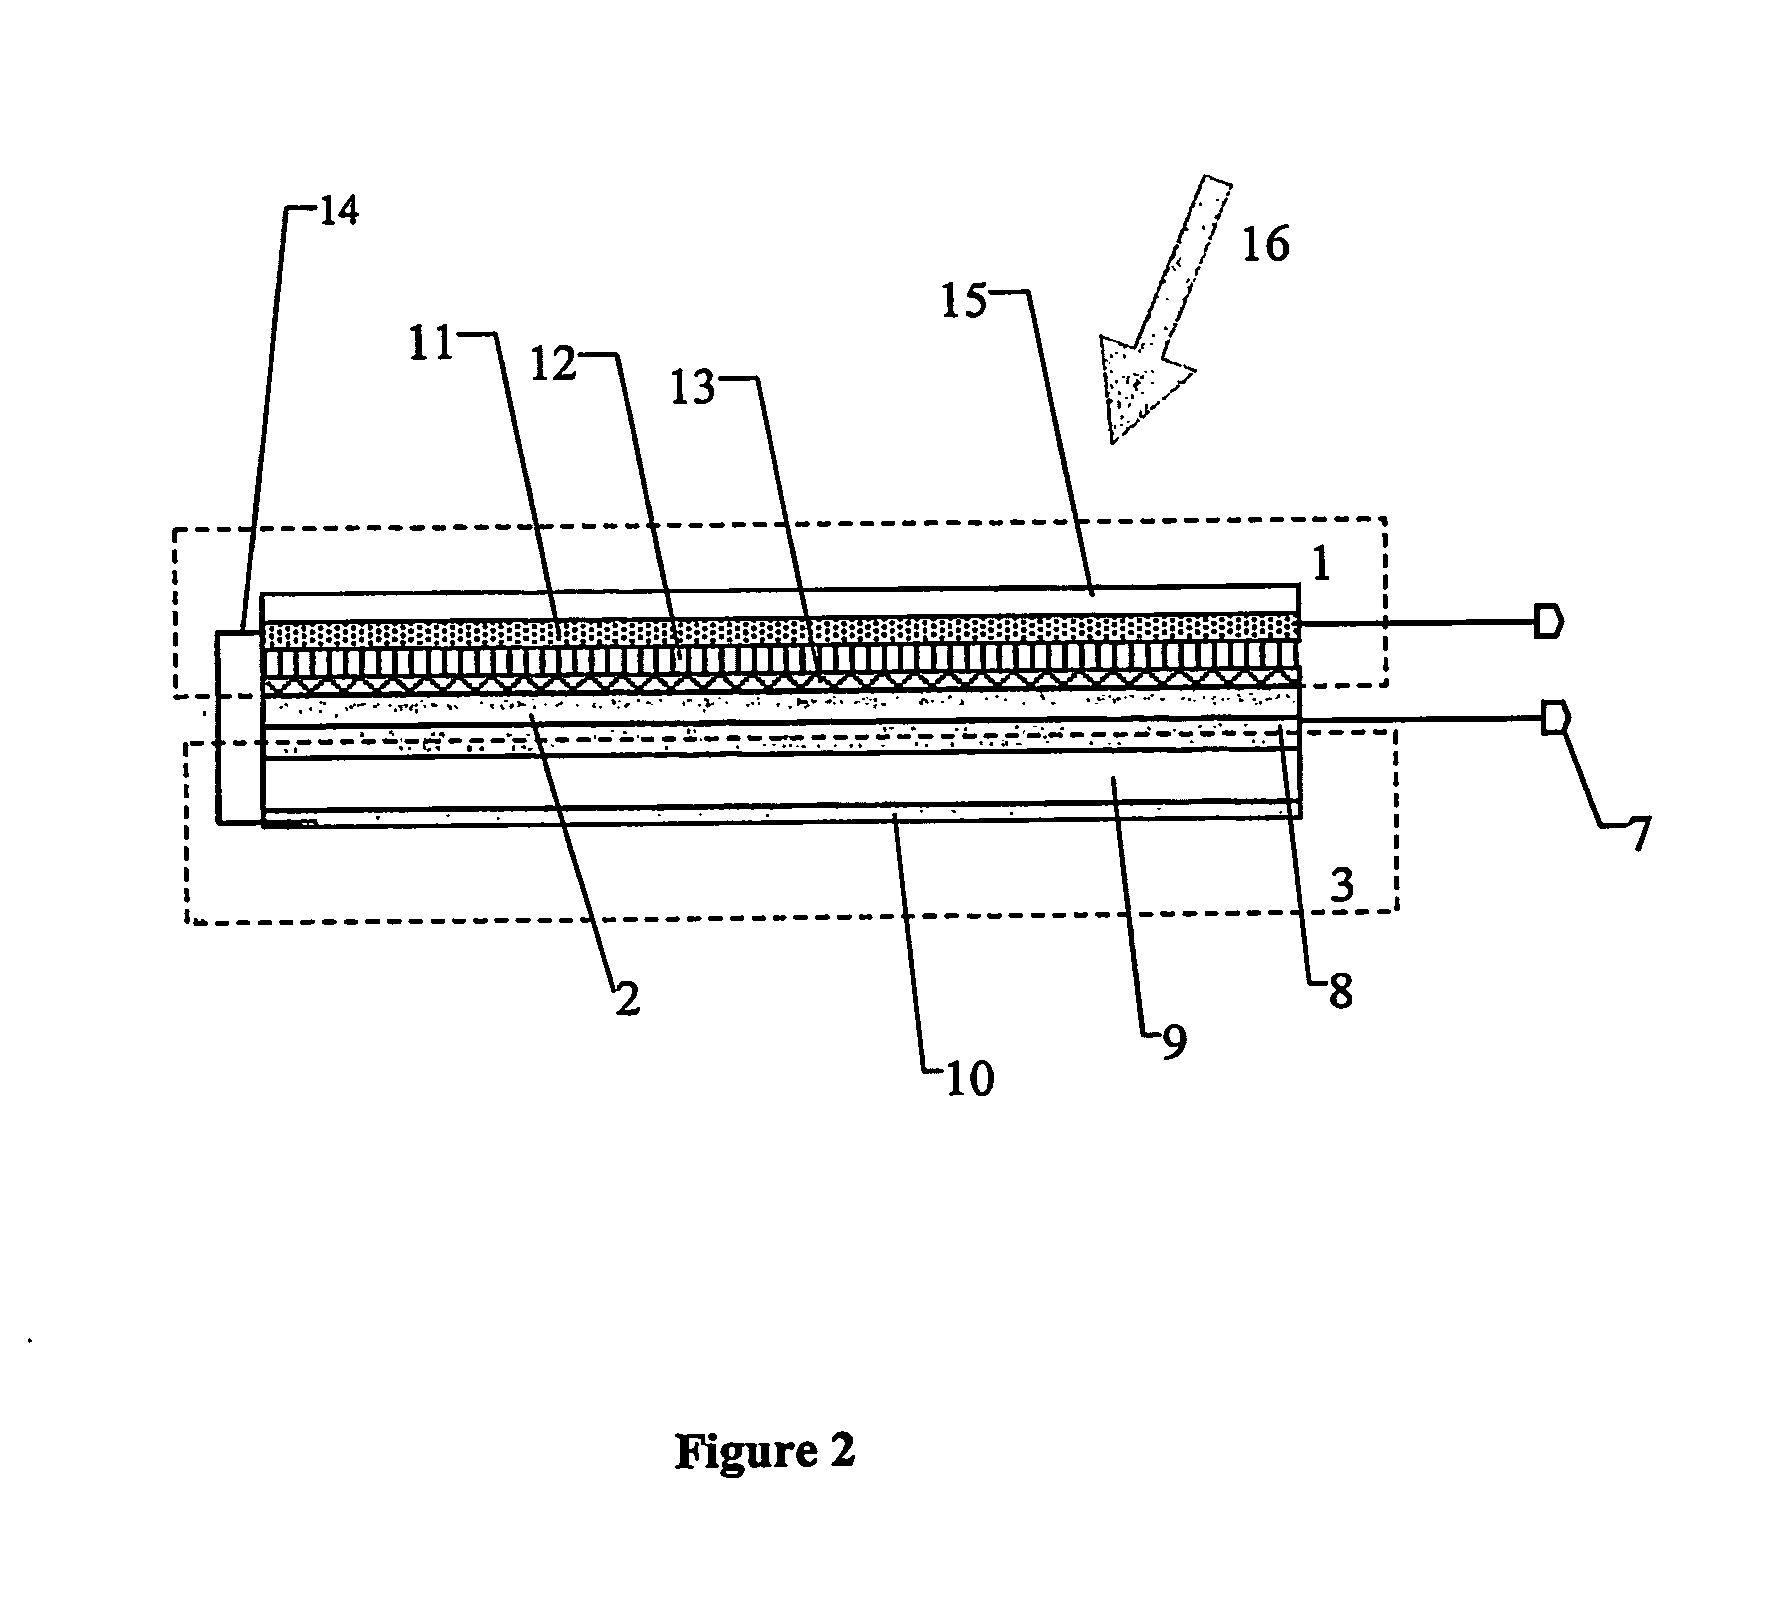 Combined photoelectrochemical cell and capacitor